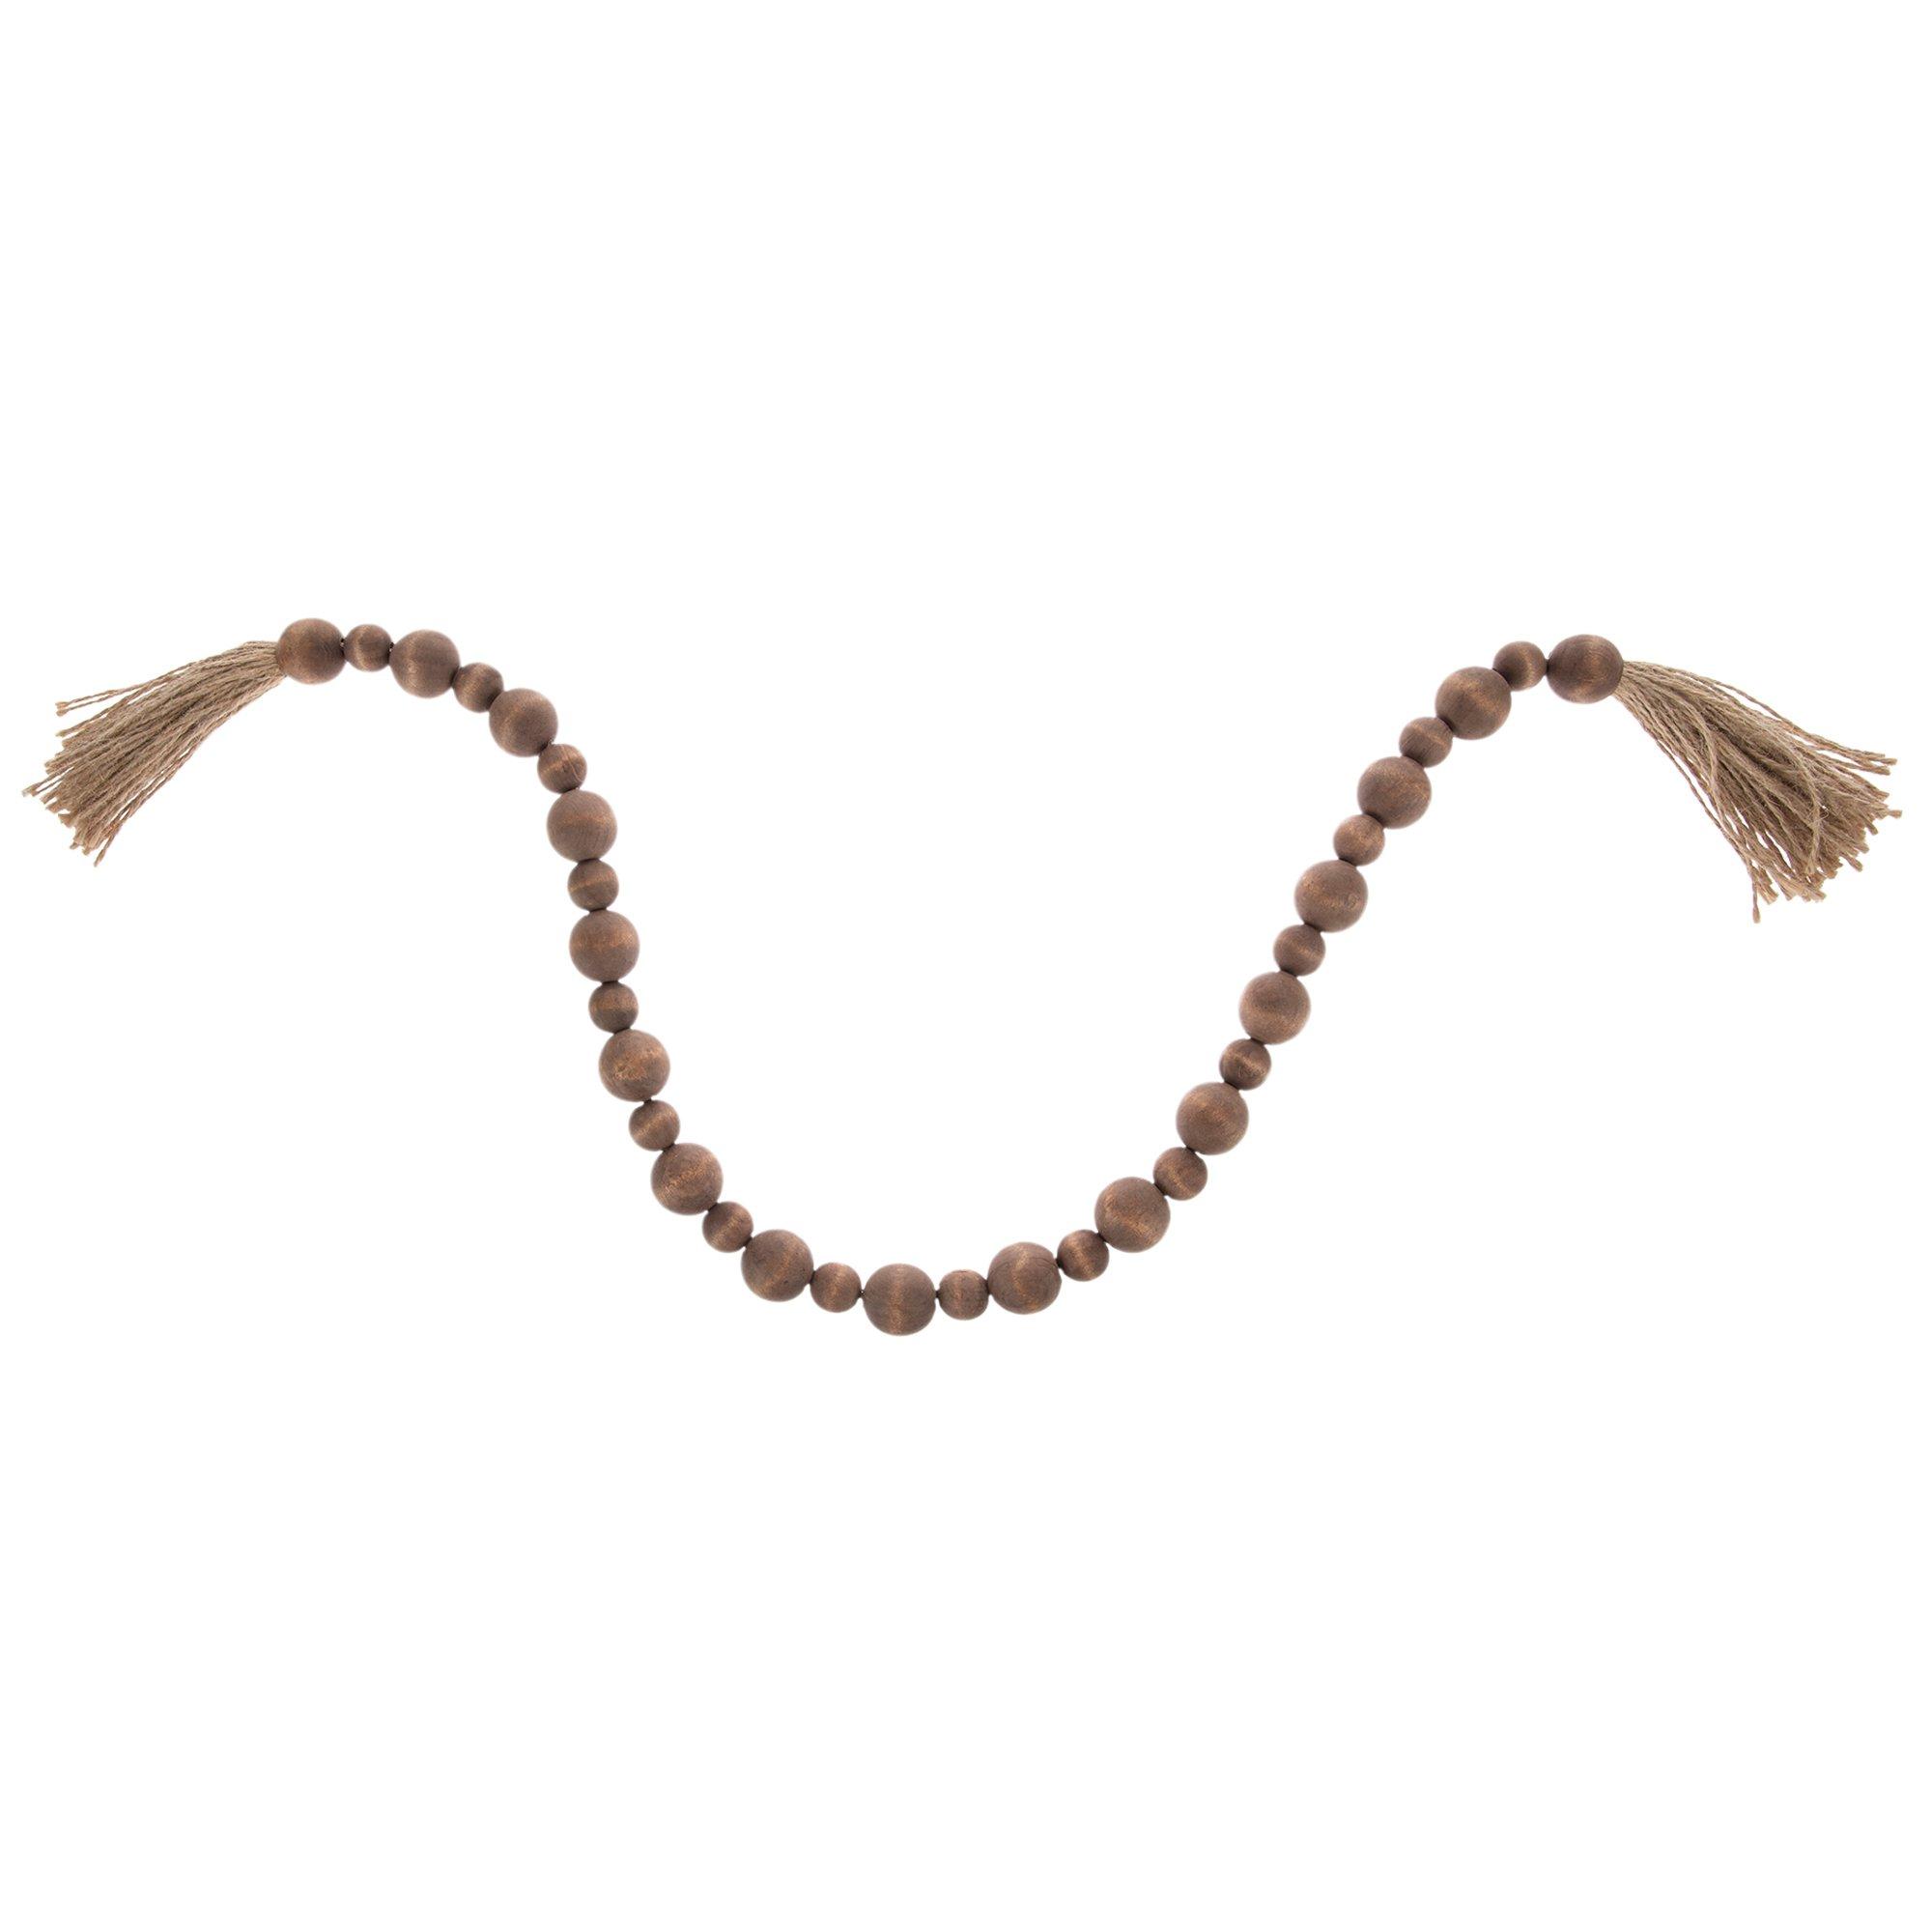 Wood Bead Garland - Distressed with Tassels – Loblolly and Lace